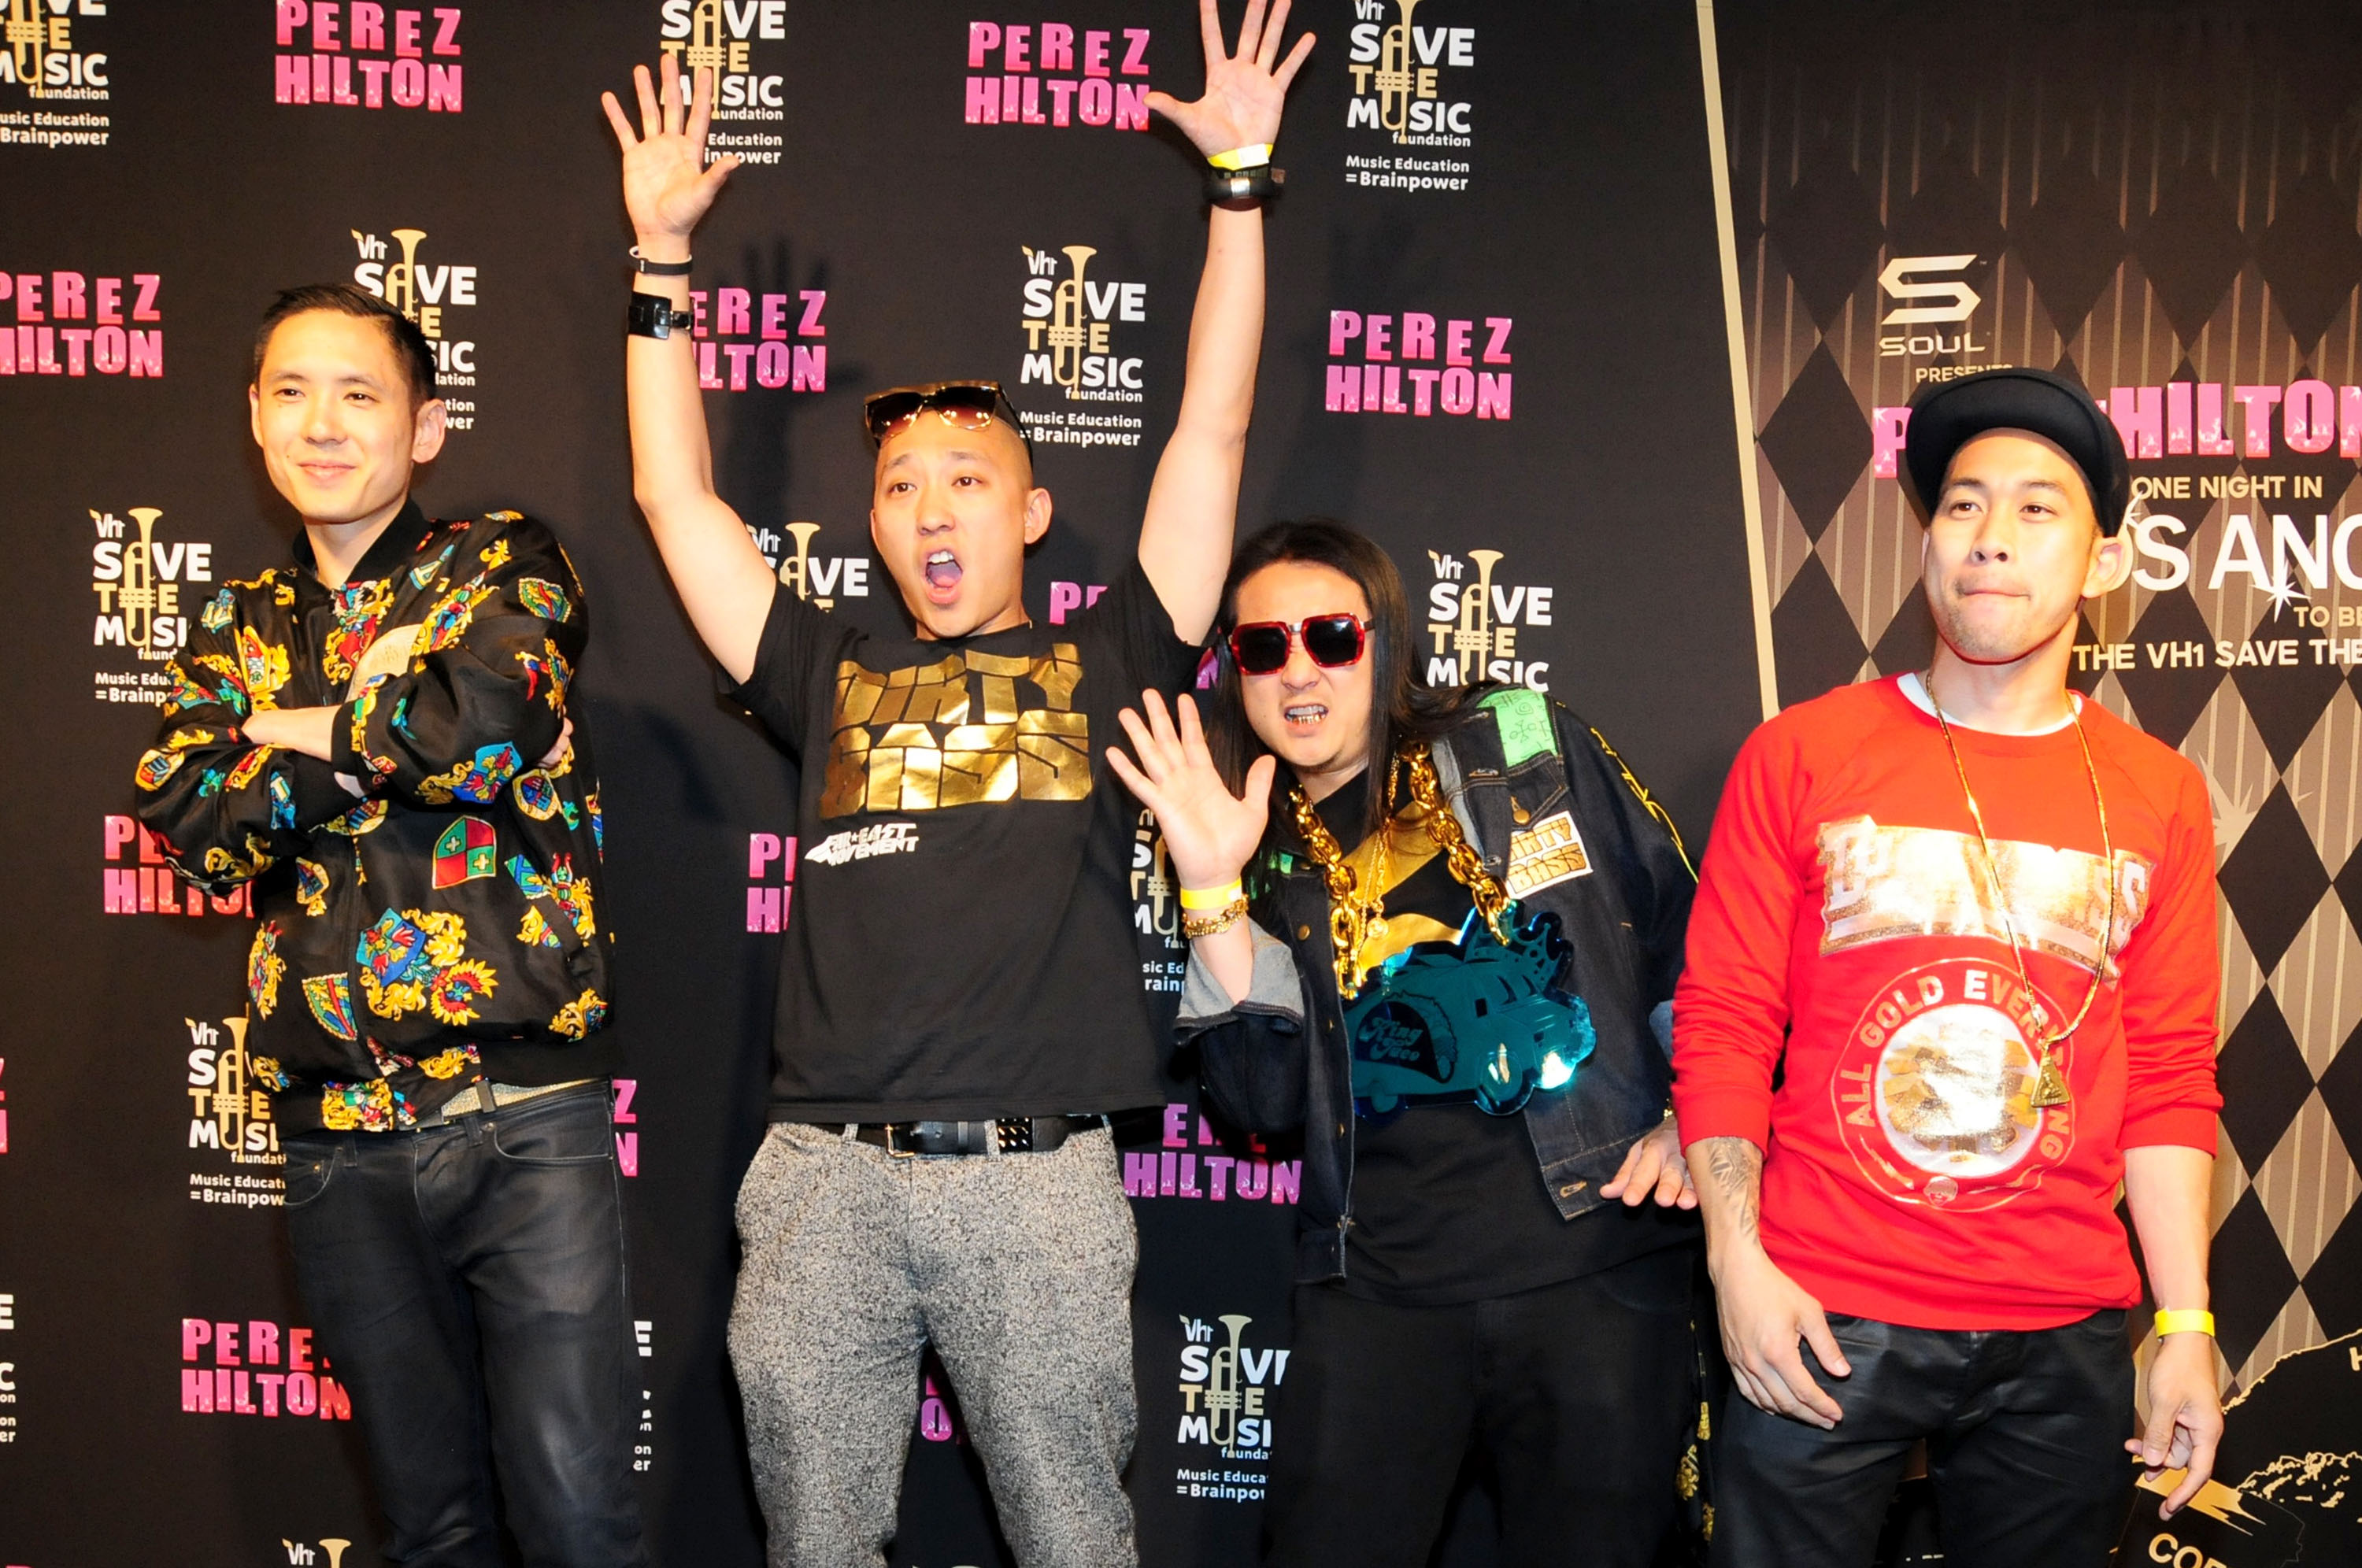 FAR EAST MOVEMENT Performs at Perez Hilton Event in Los Angeles Sept 9 2012 Photo Getty Images